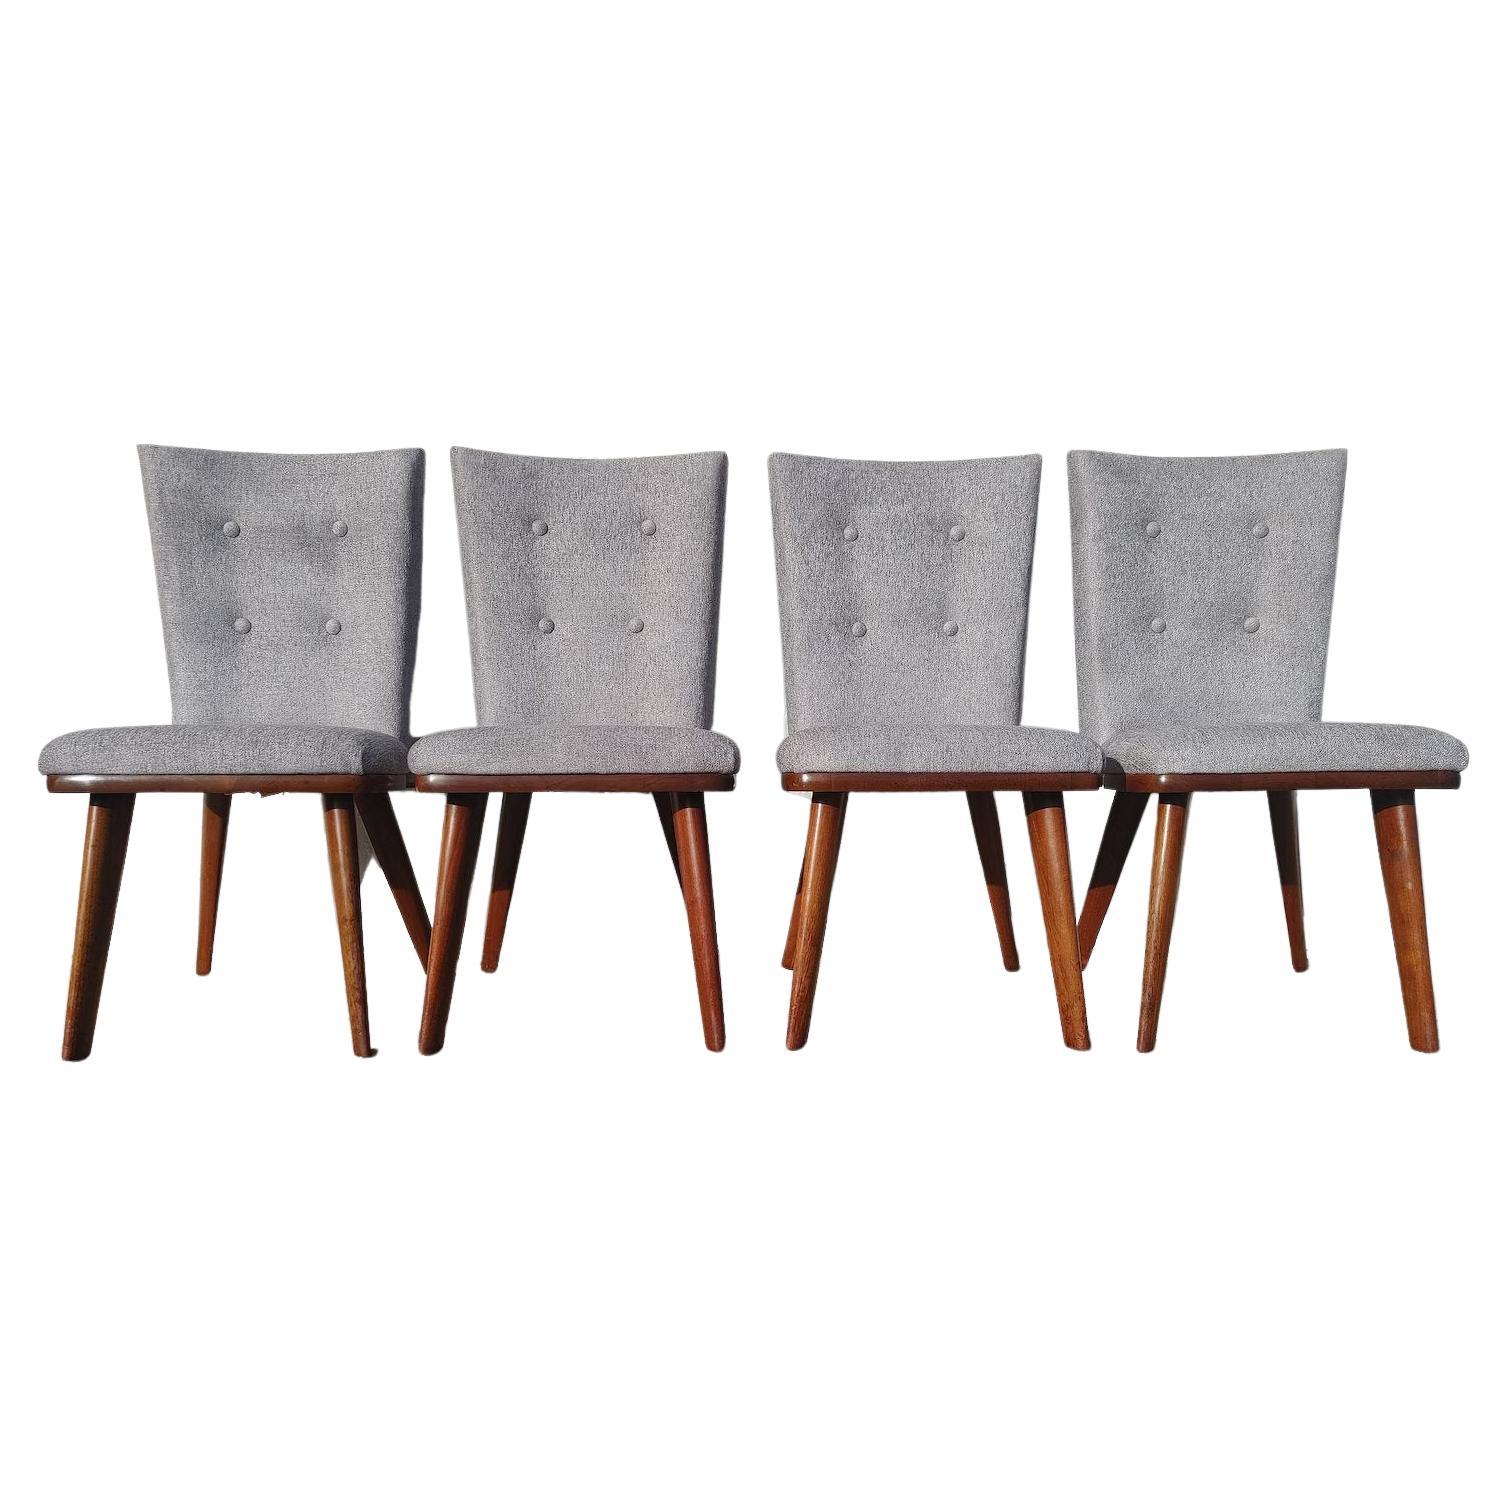 Set of 4 Mid Century Modern Solid Walnut Chairs by Bissman For Sale